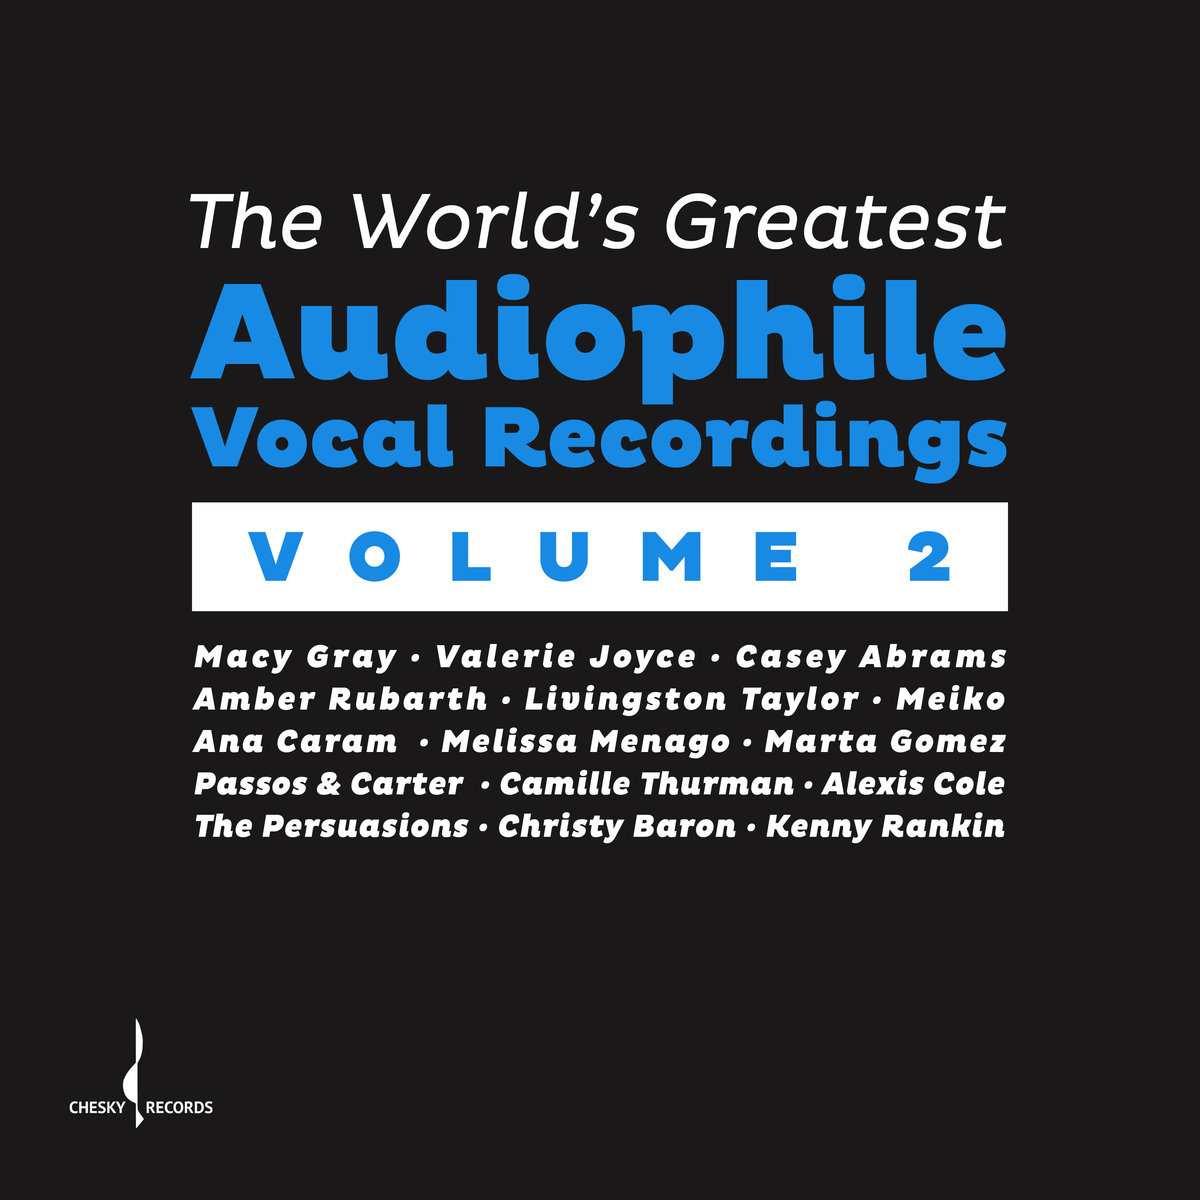 The World's Greatest Audiophile Vocal Recordings Vol. 2